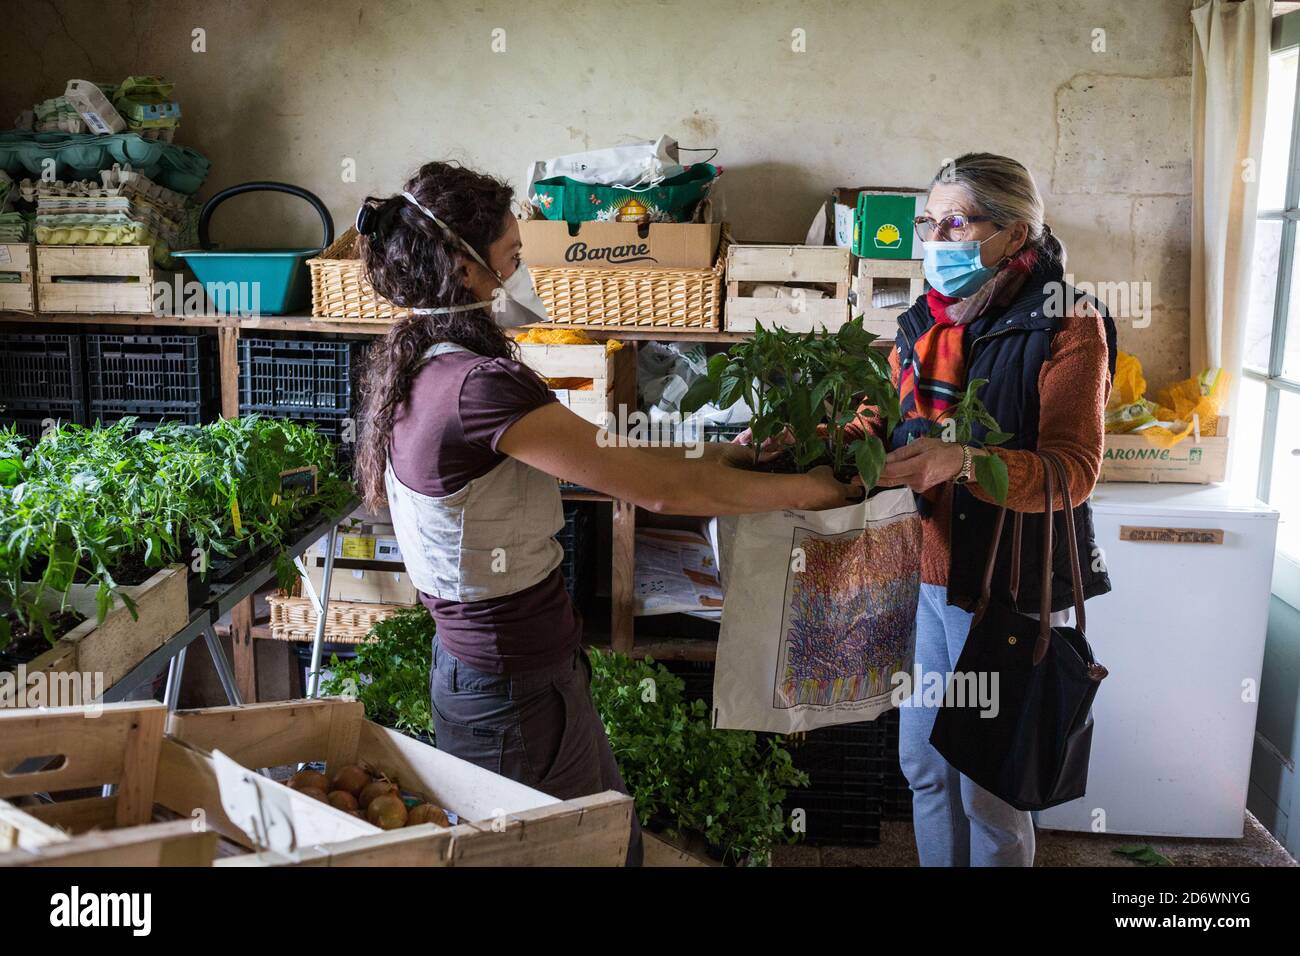 Sale of organic food on the farm during the 2019-nCoV epidemic, Dordogne, France. Stock Photo